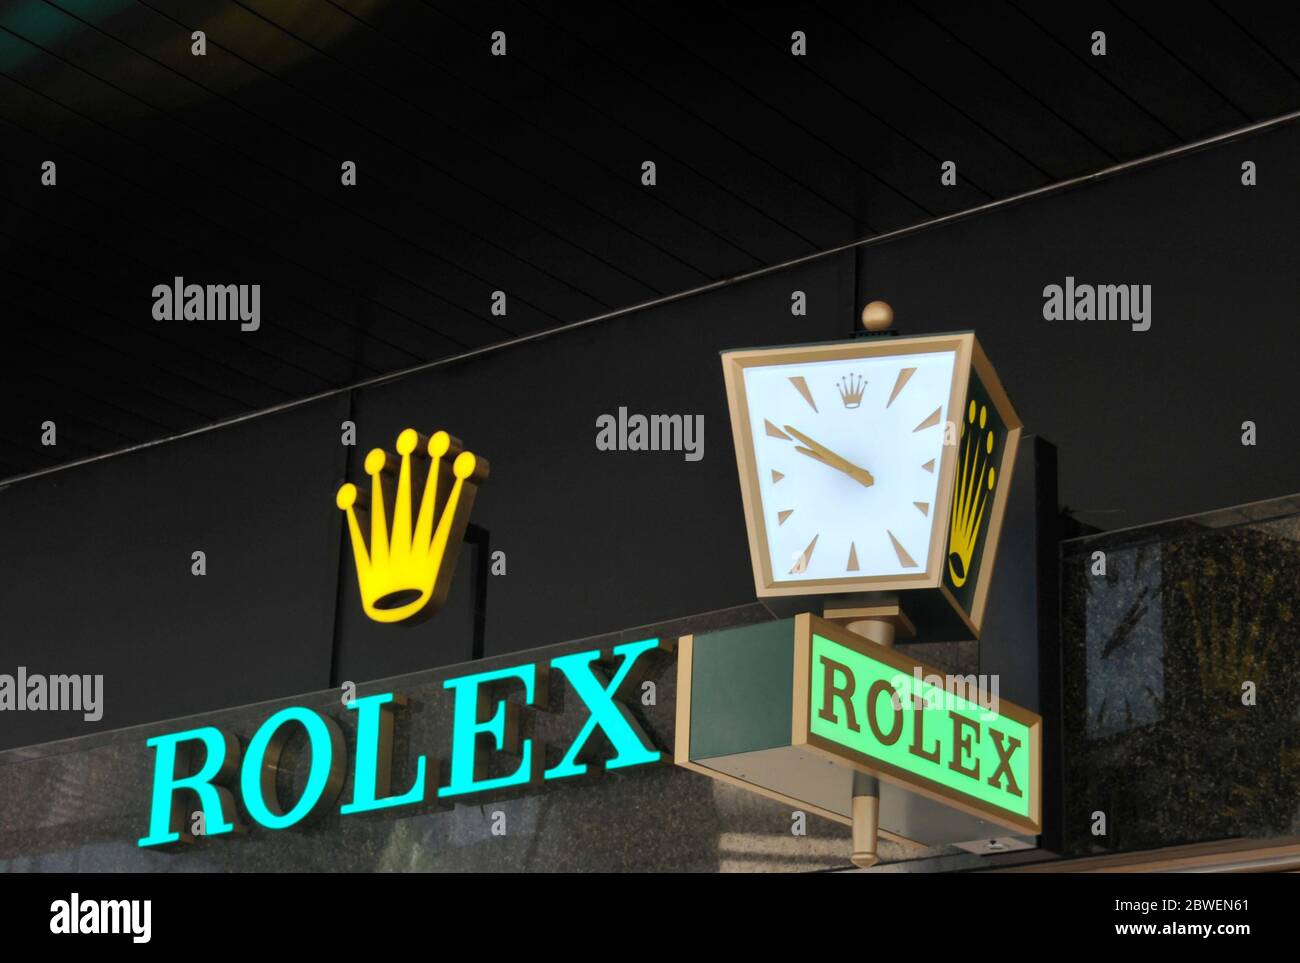 Rolex boutique, financial district, Hong Kong island, Chine Stock Photo